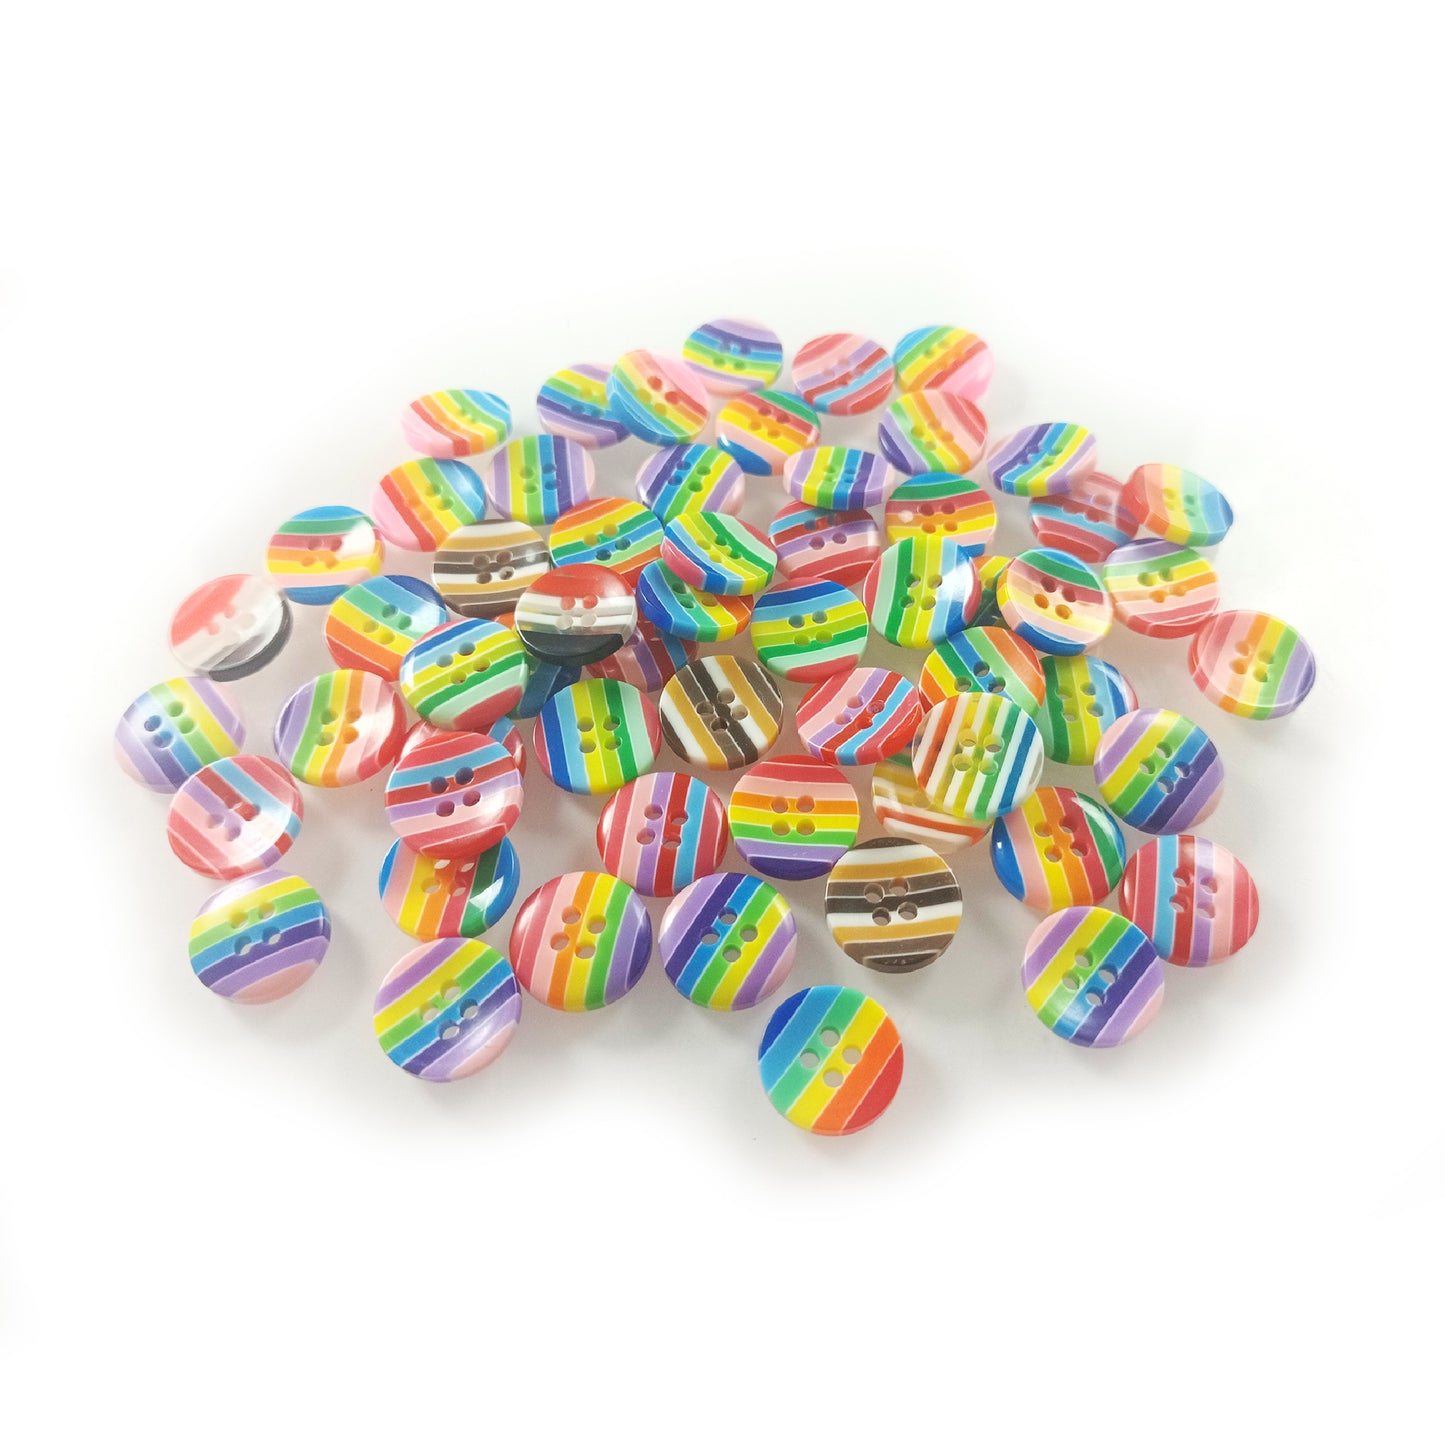 200pcs 12.5mm Mixed Resin Round Stripe Sewing Buttons For Cloth Needlework Flatback Scrapbooking Crafts